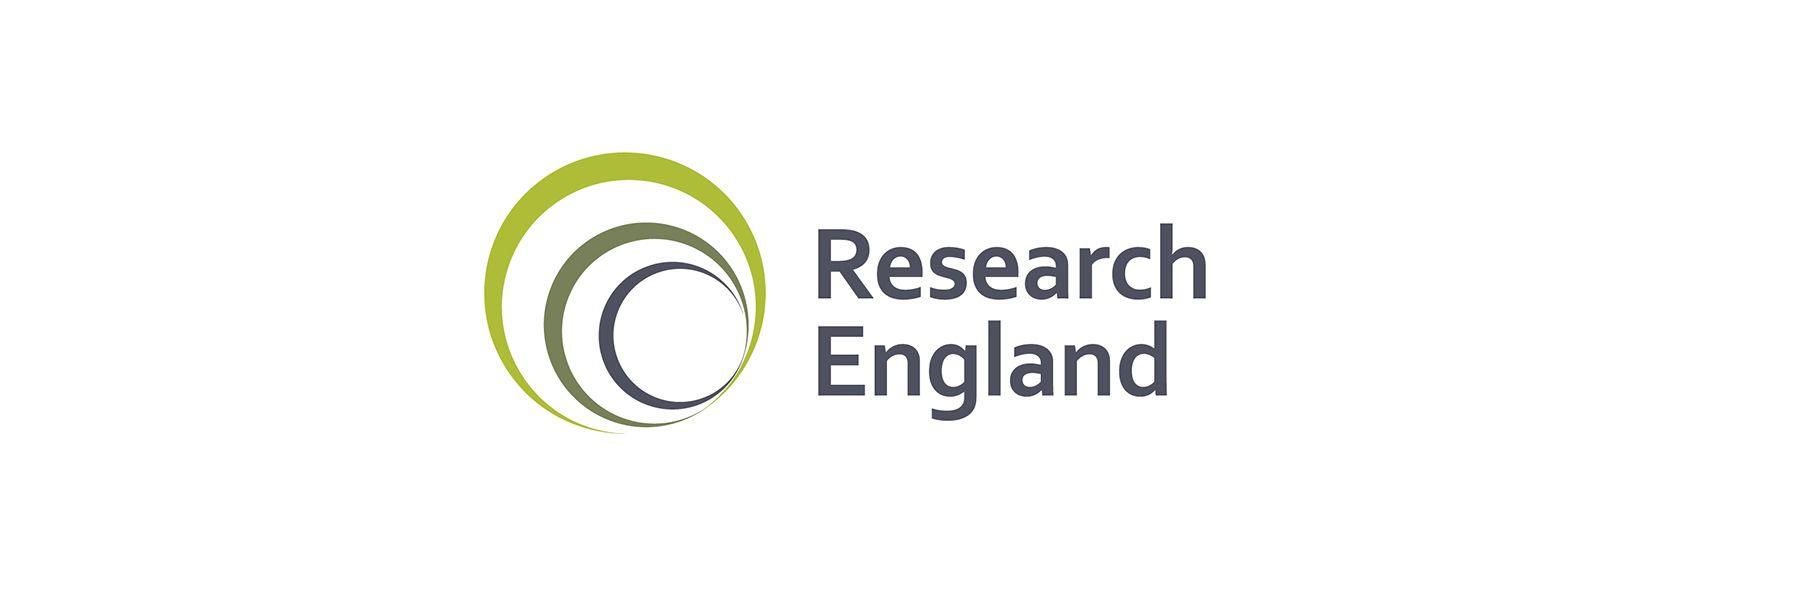 England Logo - Research England brand guidelines - Research England